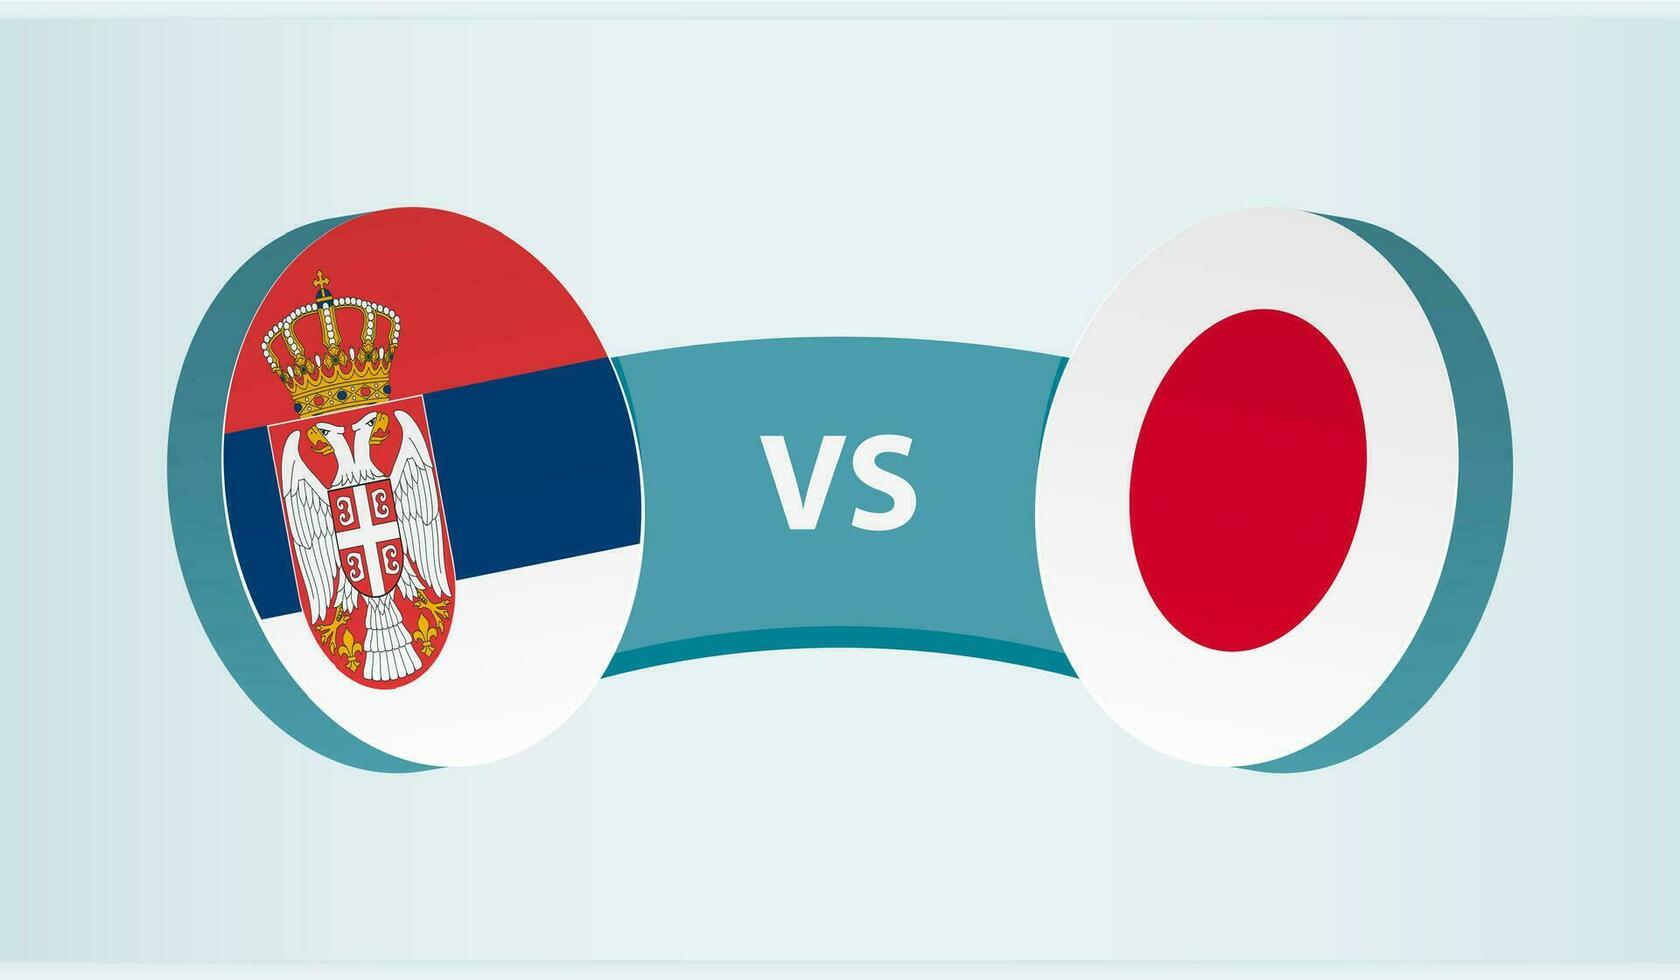 Serbia versus Japan, team sports competition concept. vector